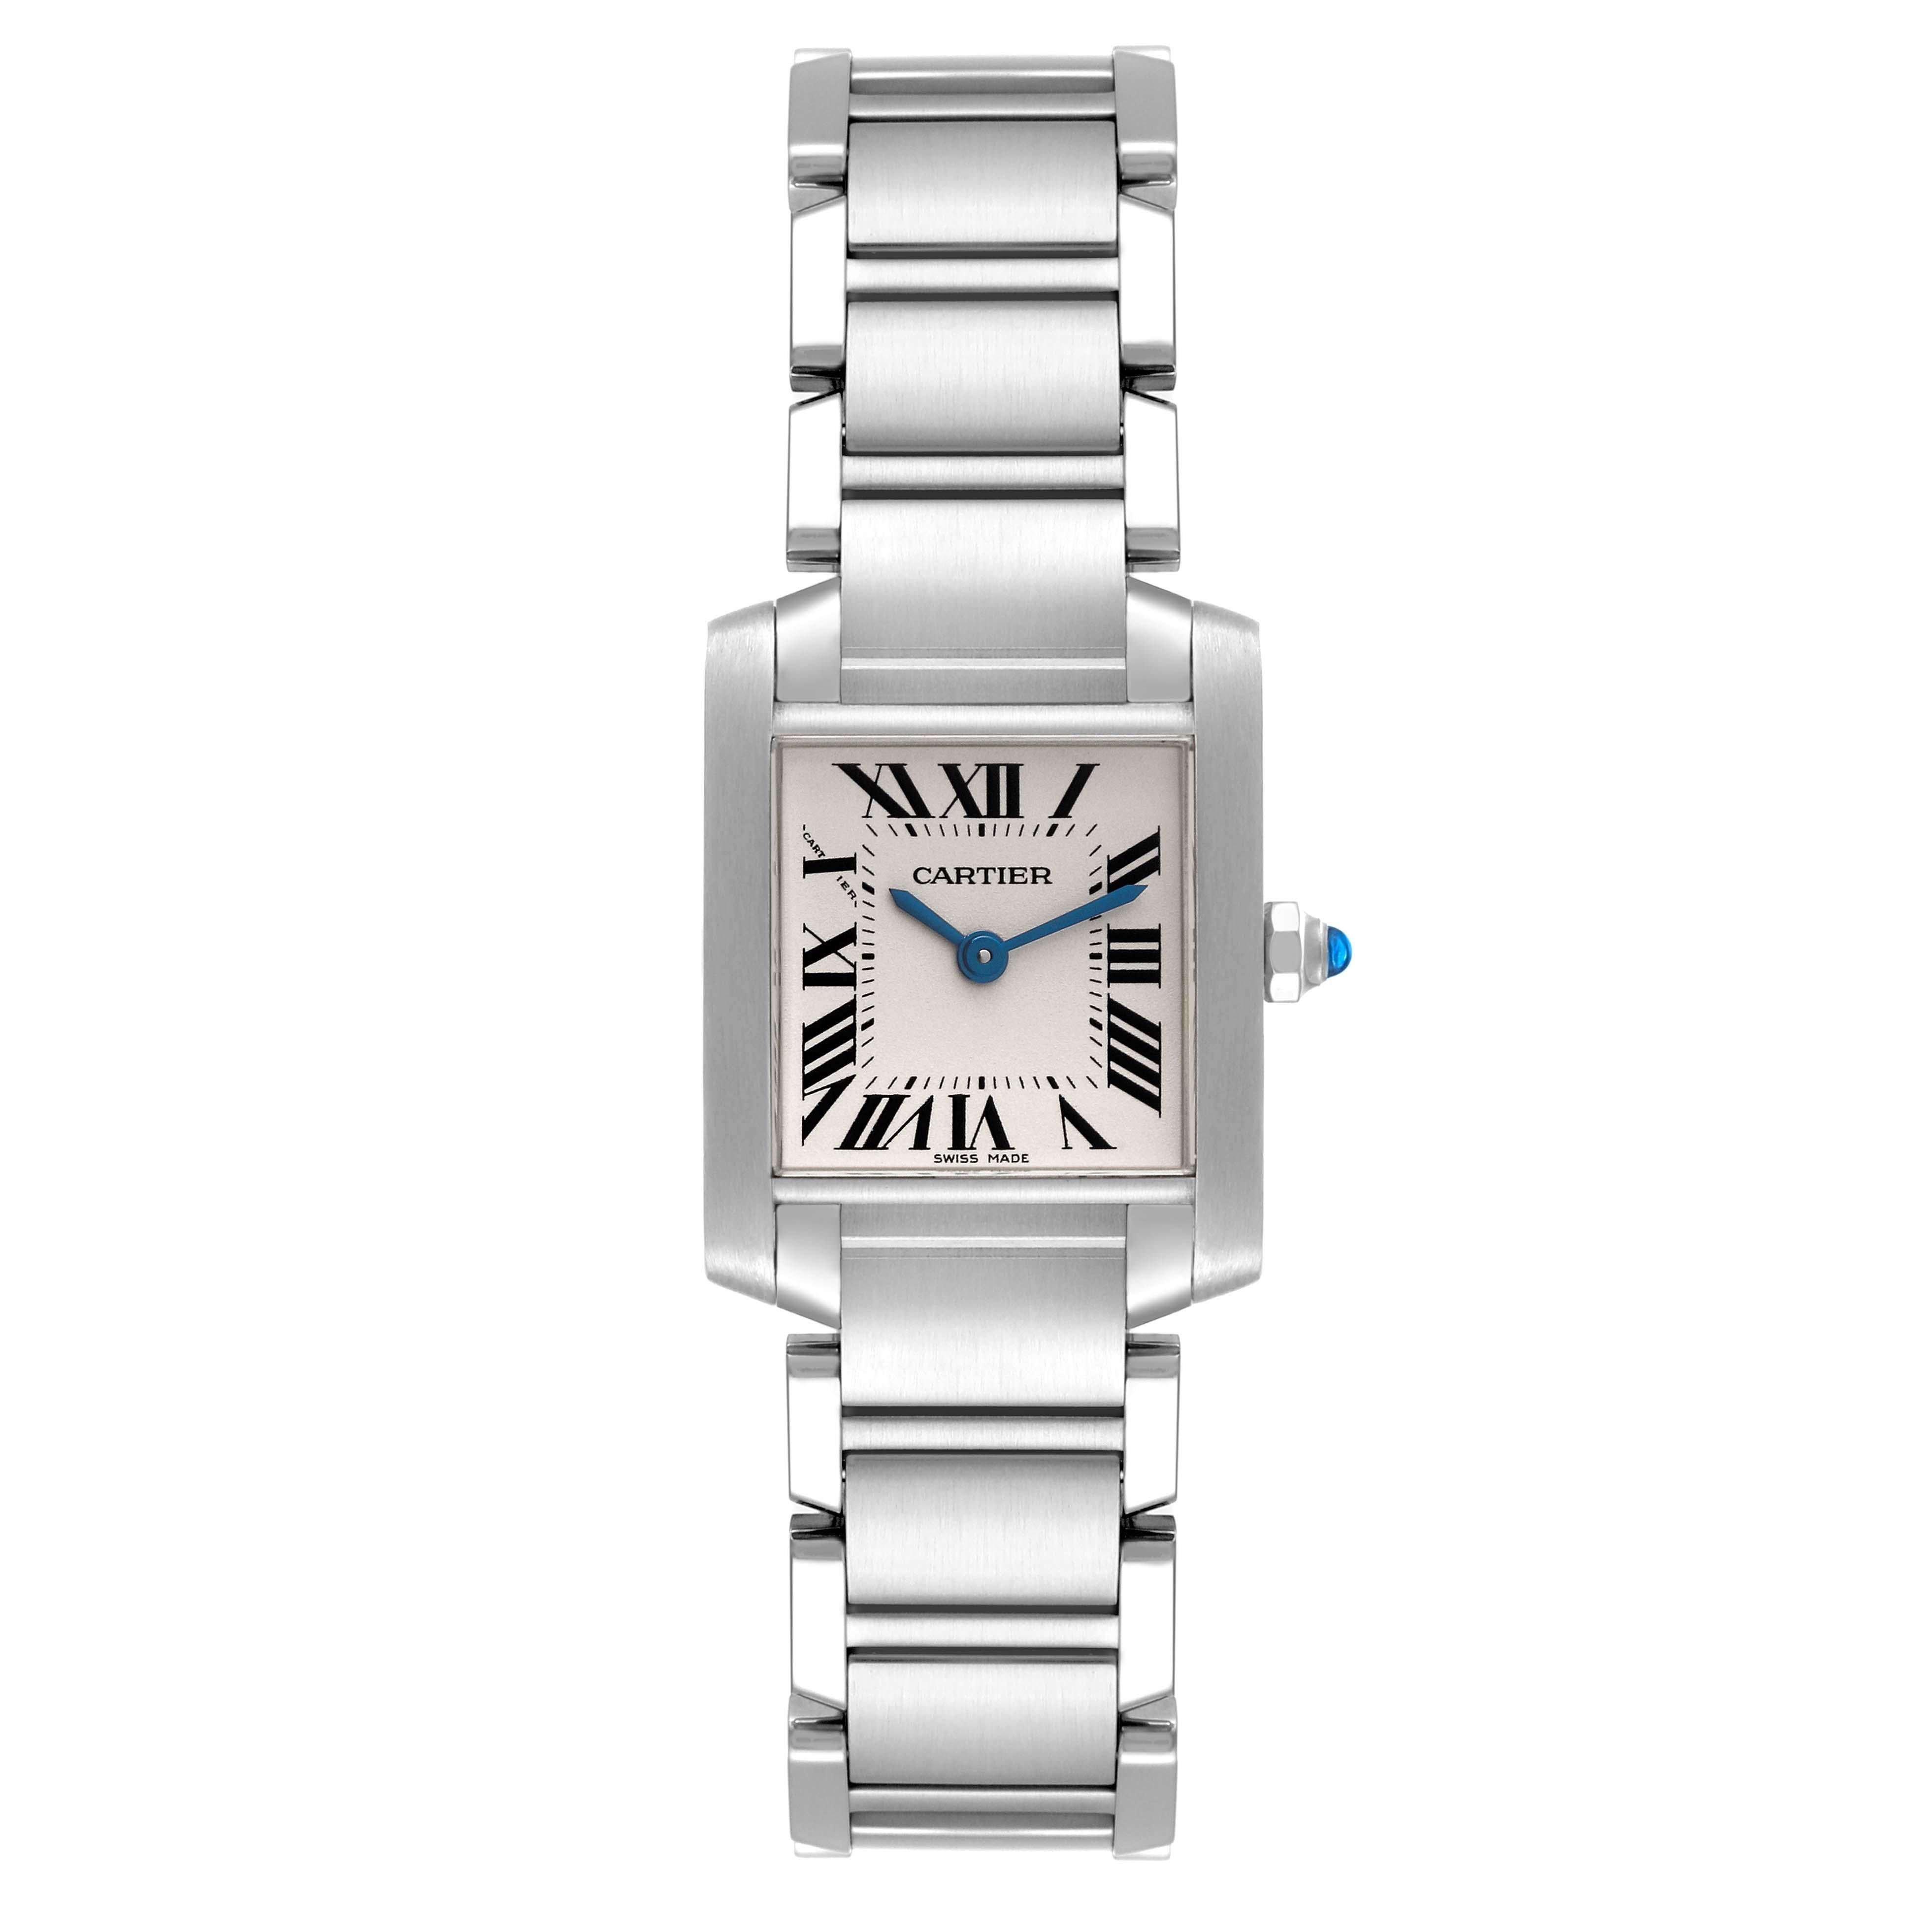 Cartier Tank Francaise Small Silver Dial Steel Ladies Watch W51008Q3 Box Papers. Quartz movement. Rectangular stainless steel 20.0 x 25.0 mm case. Octagonal crown set with a blue spinel cabochon. . Scratch resistant sapphire crystal. Silver opaline